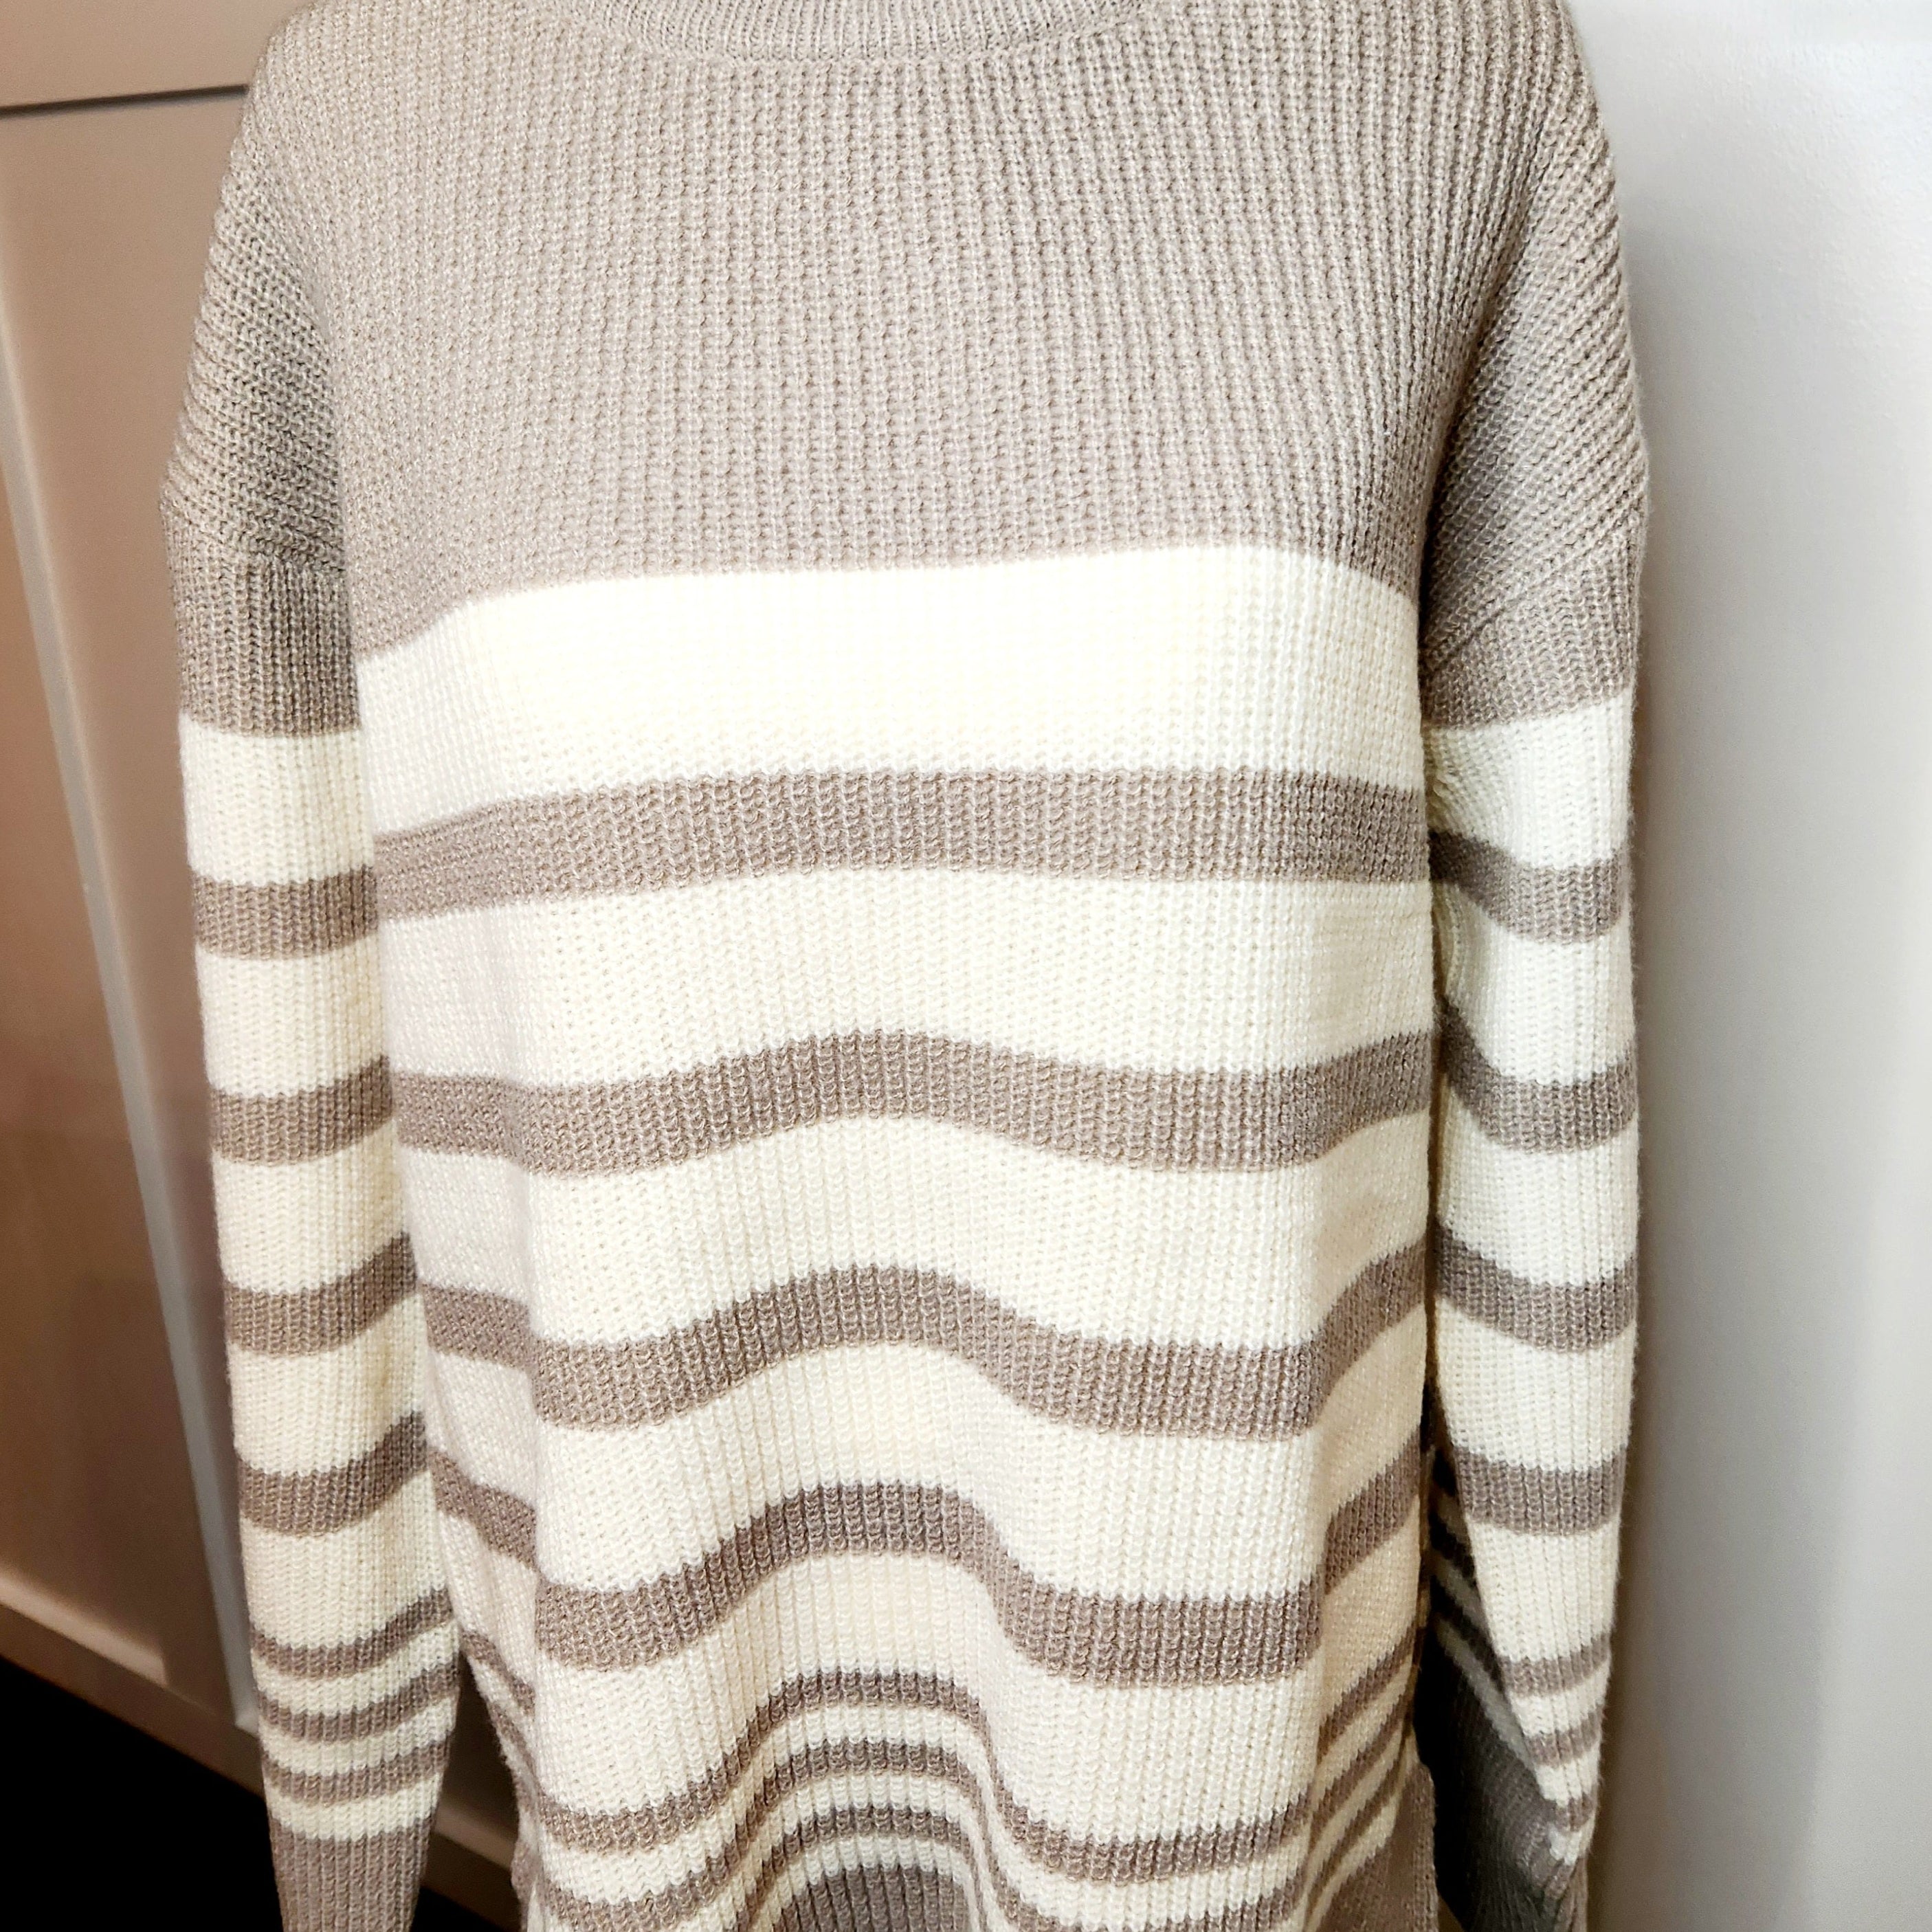 Taupe Ivory Striped Sweater - Plus-Sweater-Heimish-LouisGeorge Boutique, Women’s Fashion Boutique Located in Trussville, Alabama